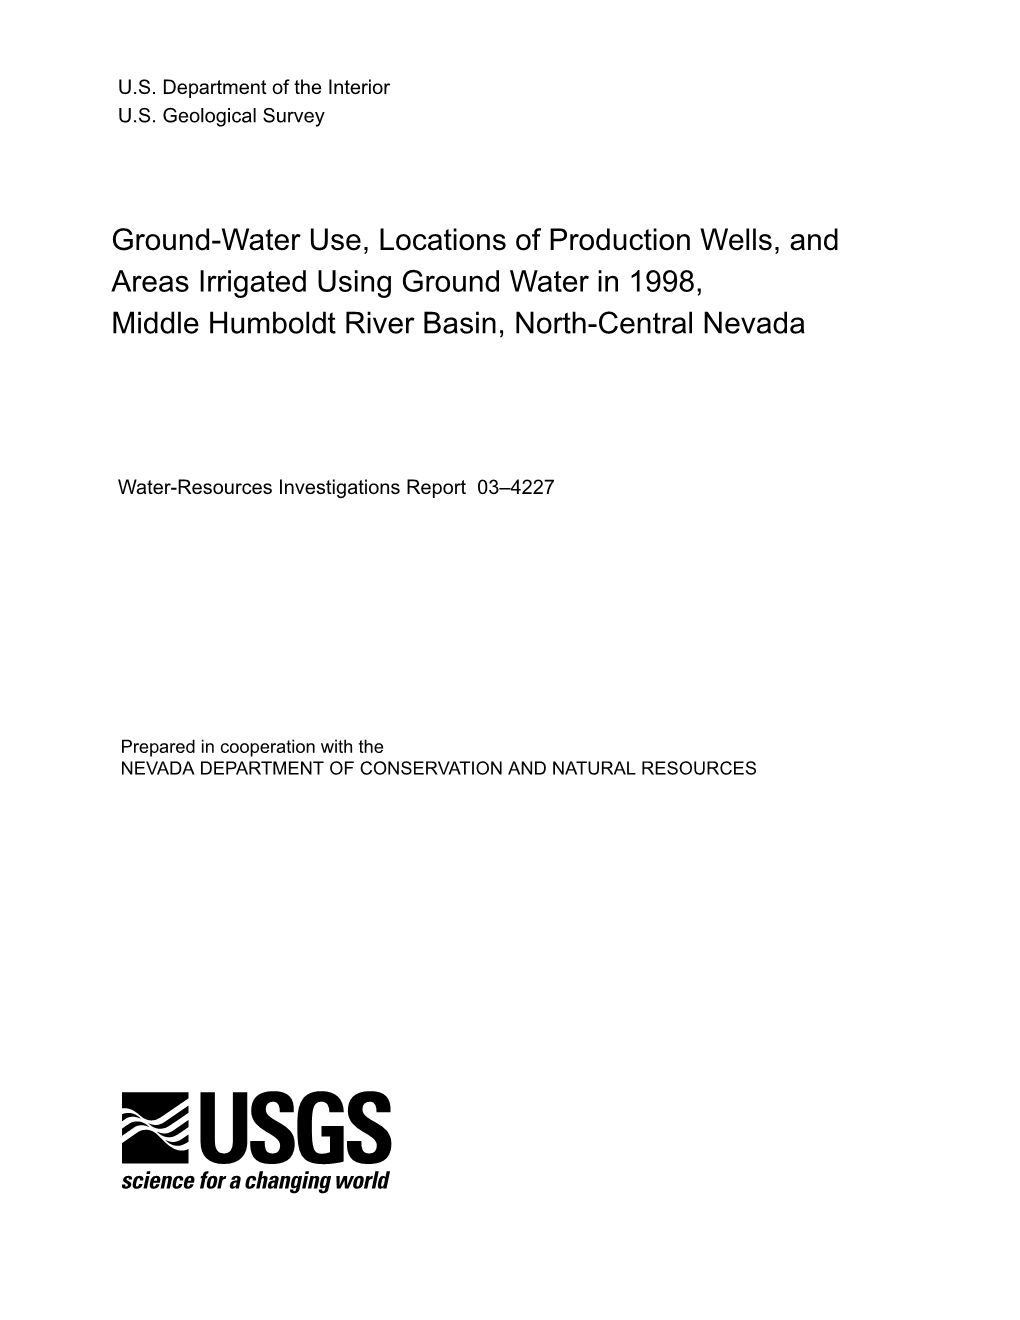 Ground-Water Use, Locations of Production Wells, and Areas Irrigated Using Ground Water in 1998, Middle Humboldt River Basin, North-Central Nevada